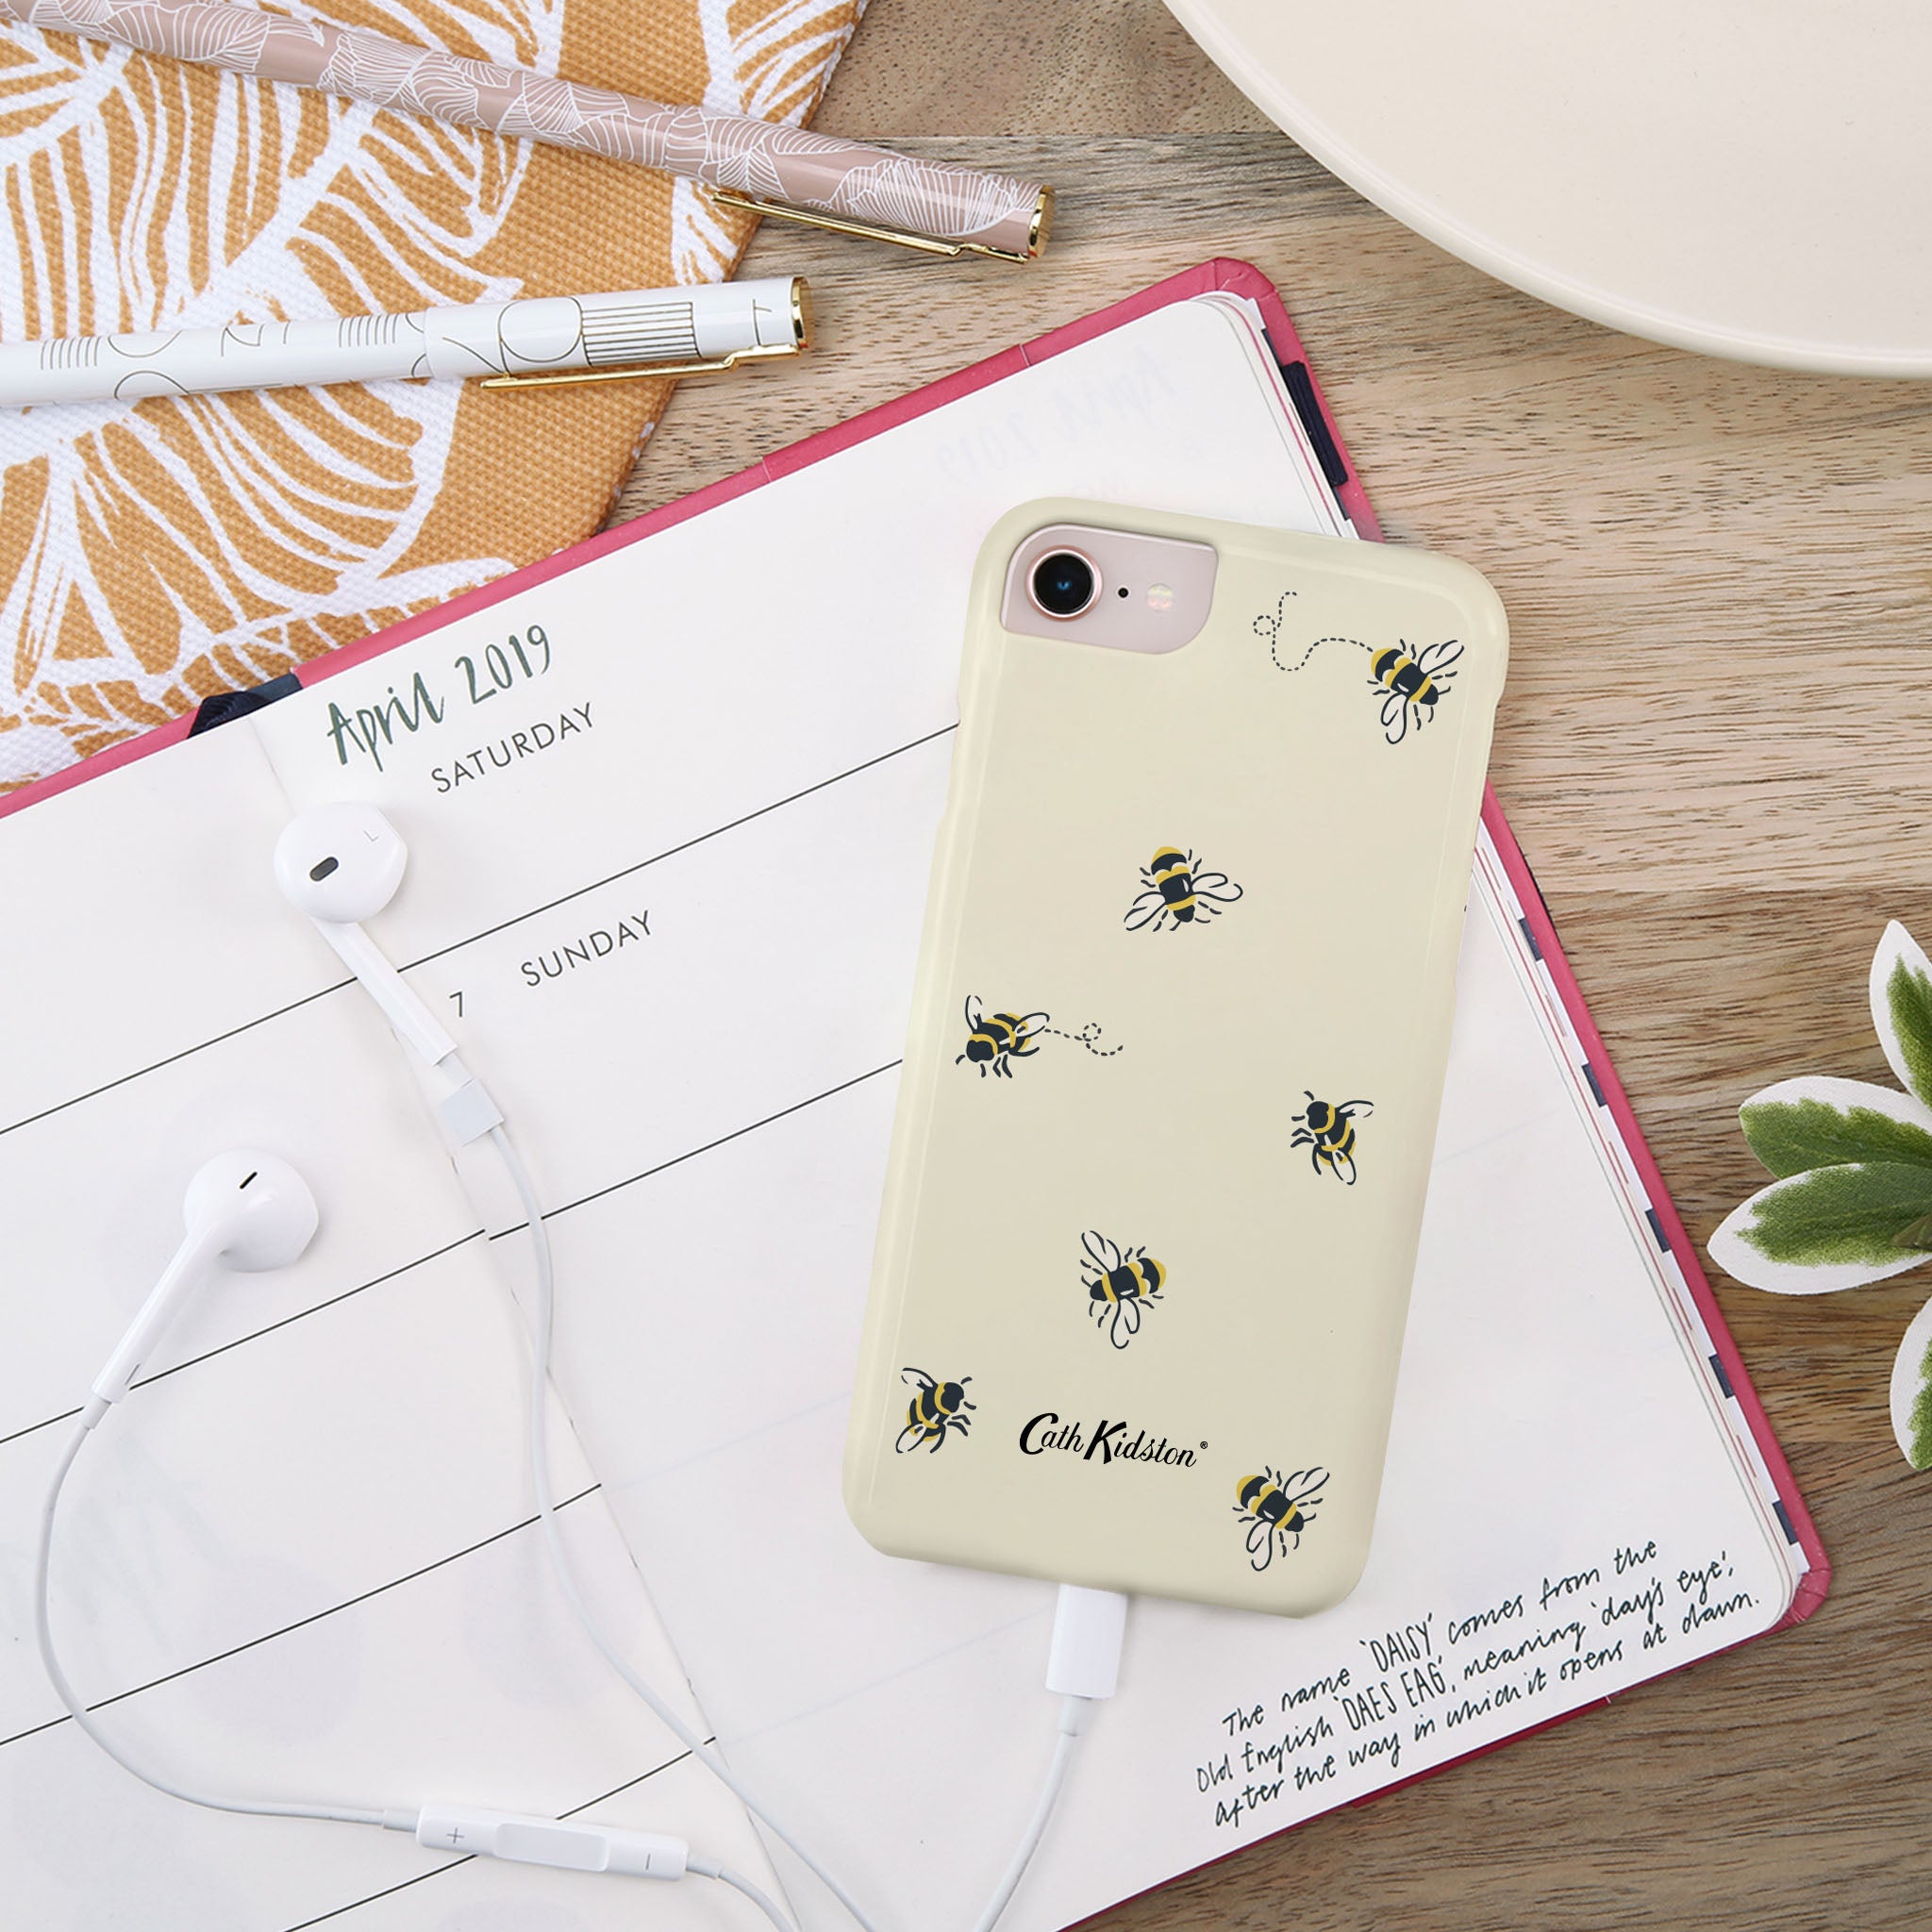 The MYVQ iPhone series 6/7/8 premium high gloss scratch-resistant phone case. Featuring a luxurious microfiber insert to cradle and protect your smartphone device.  